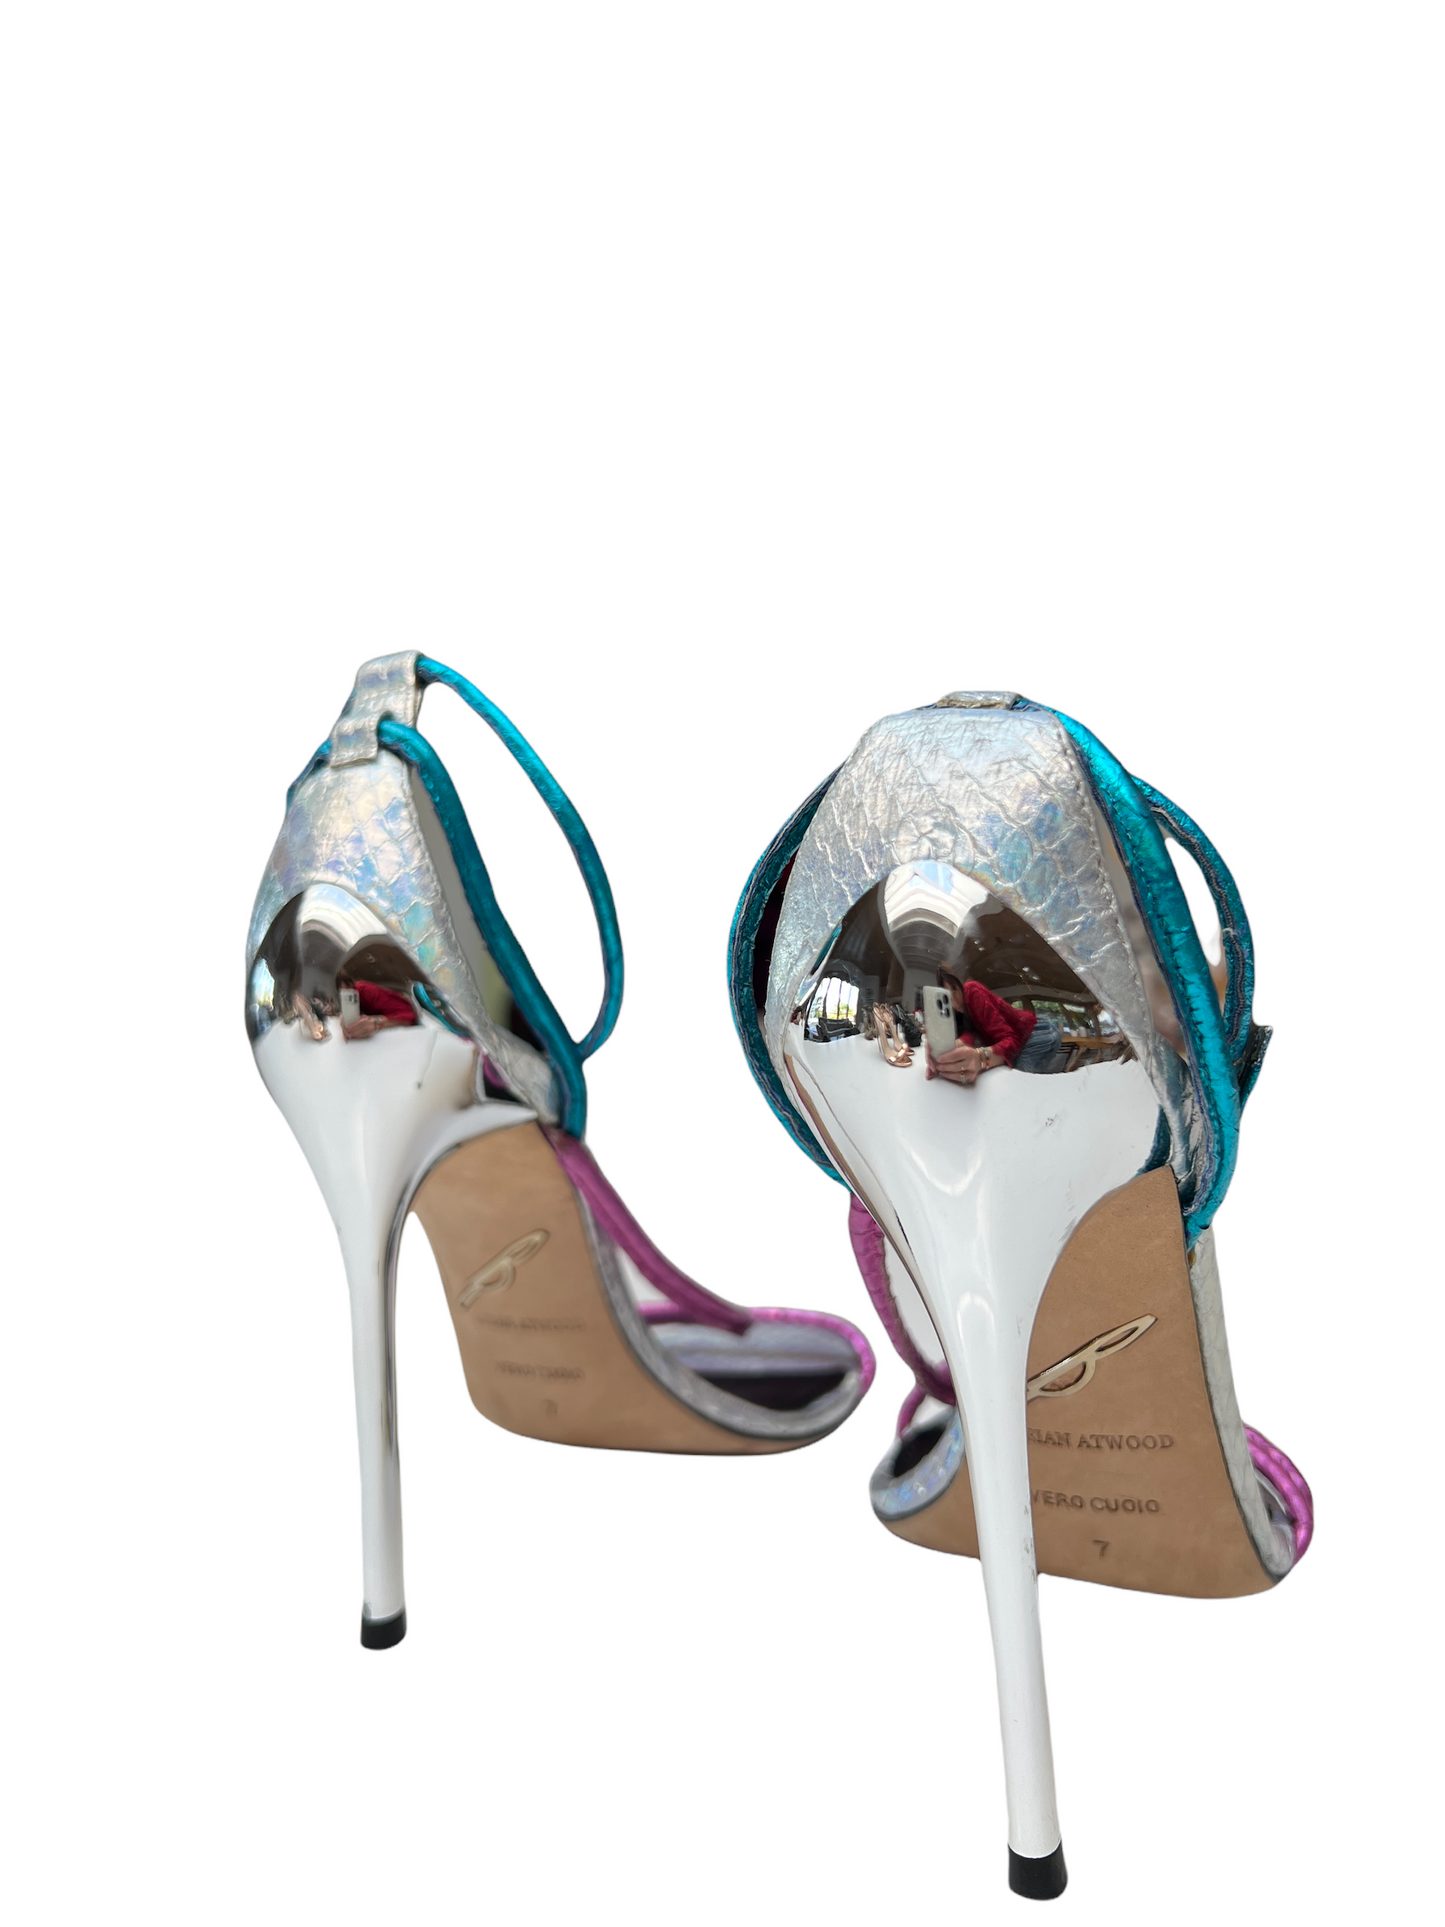 Multicolor Leather High Heels - 7